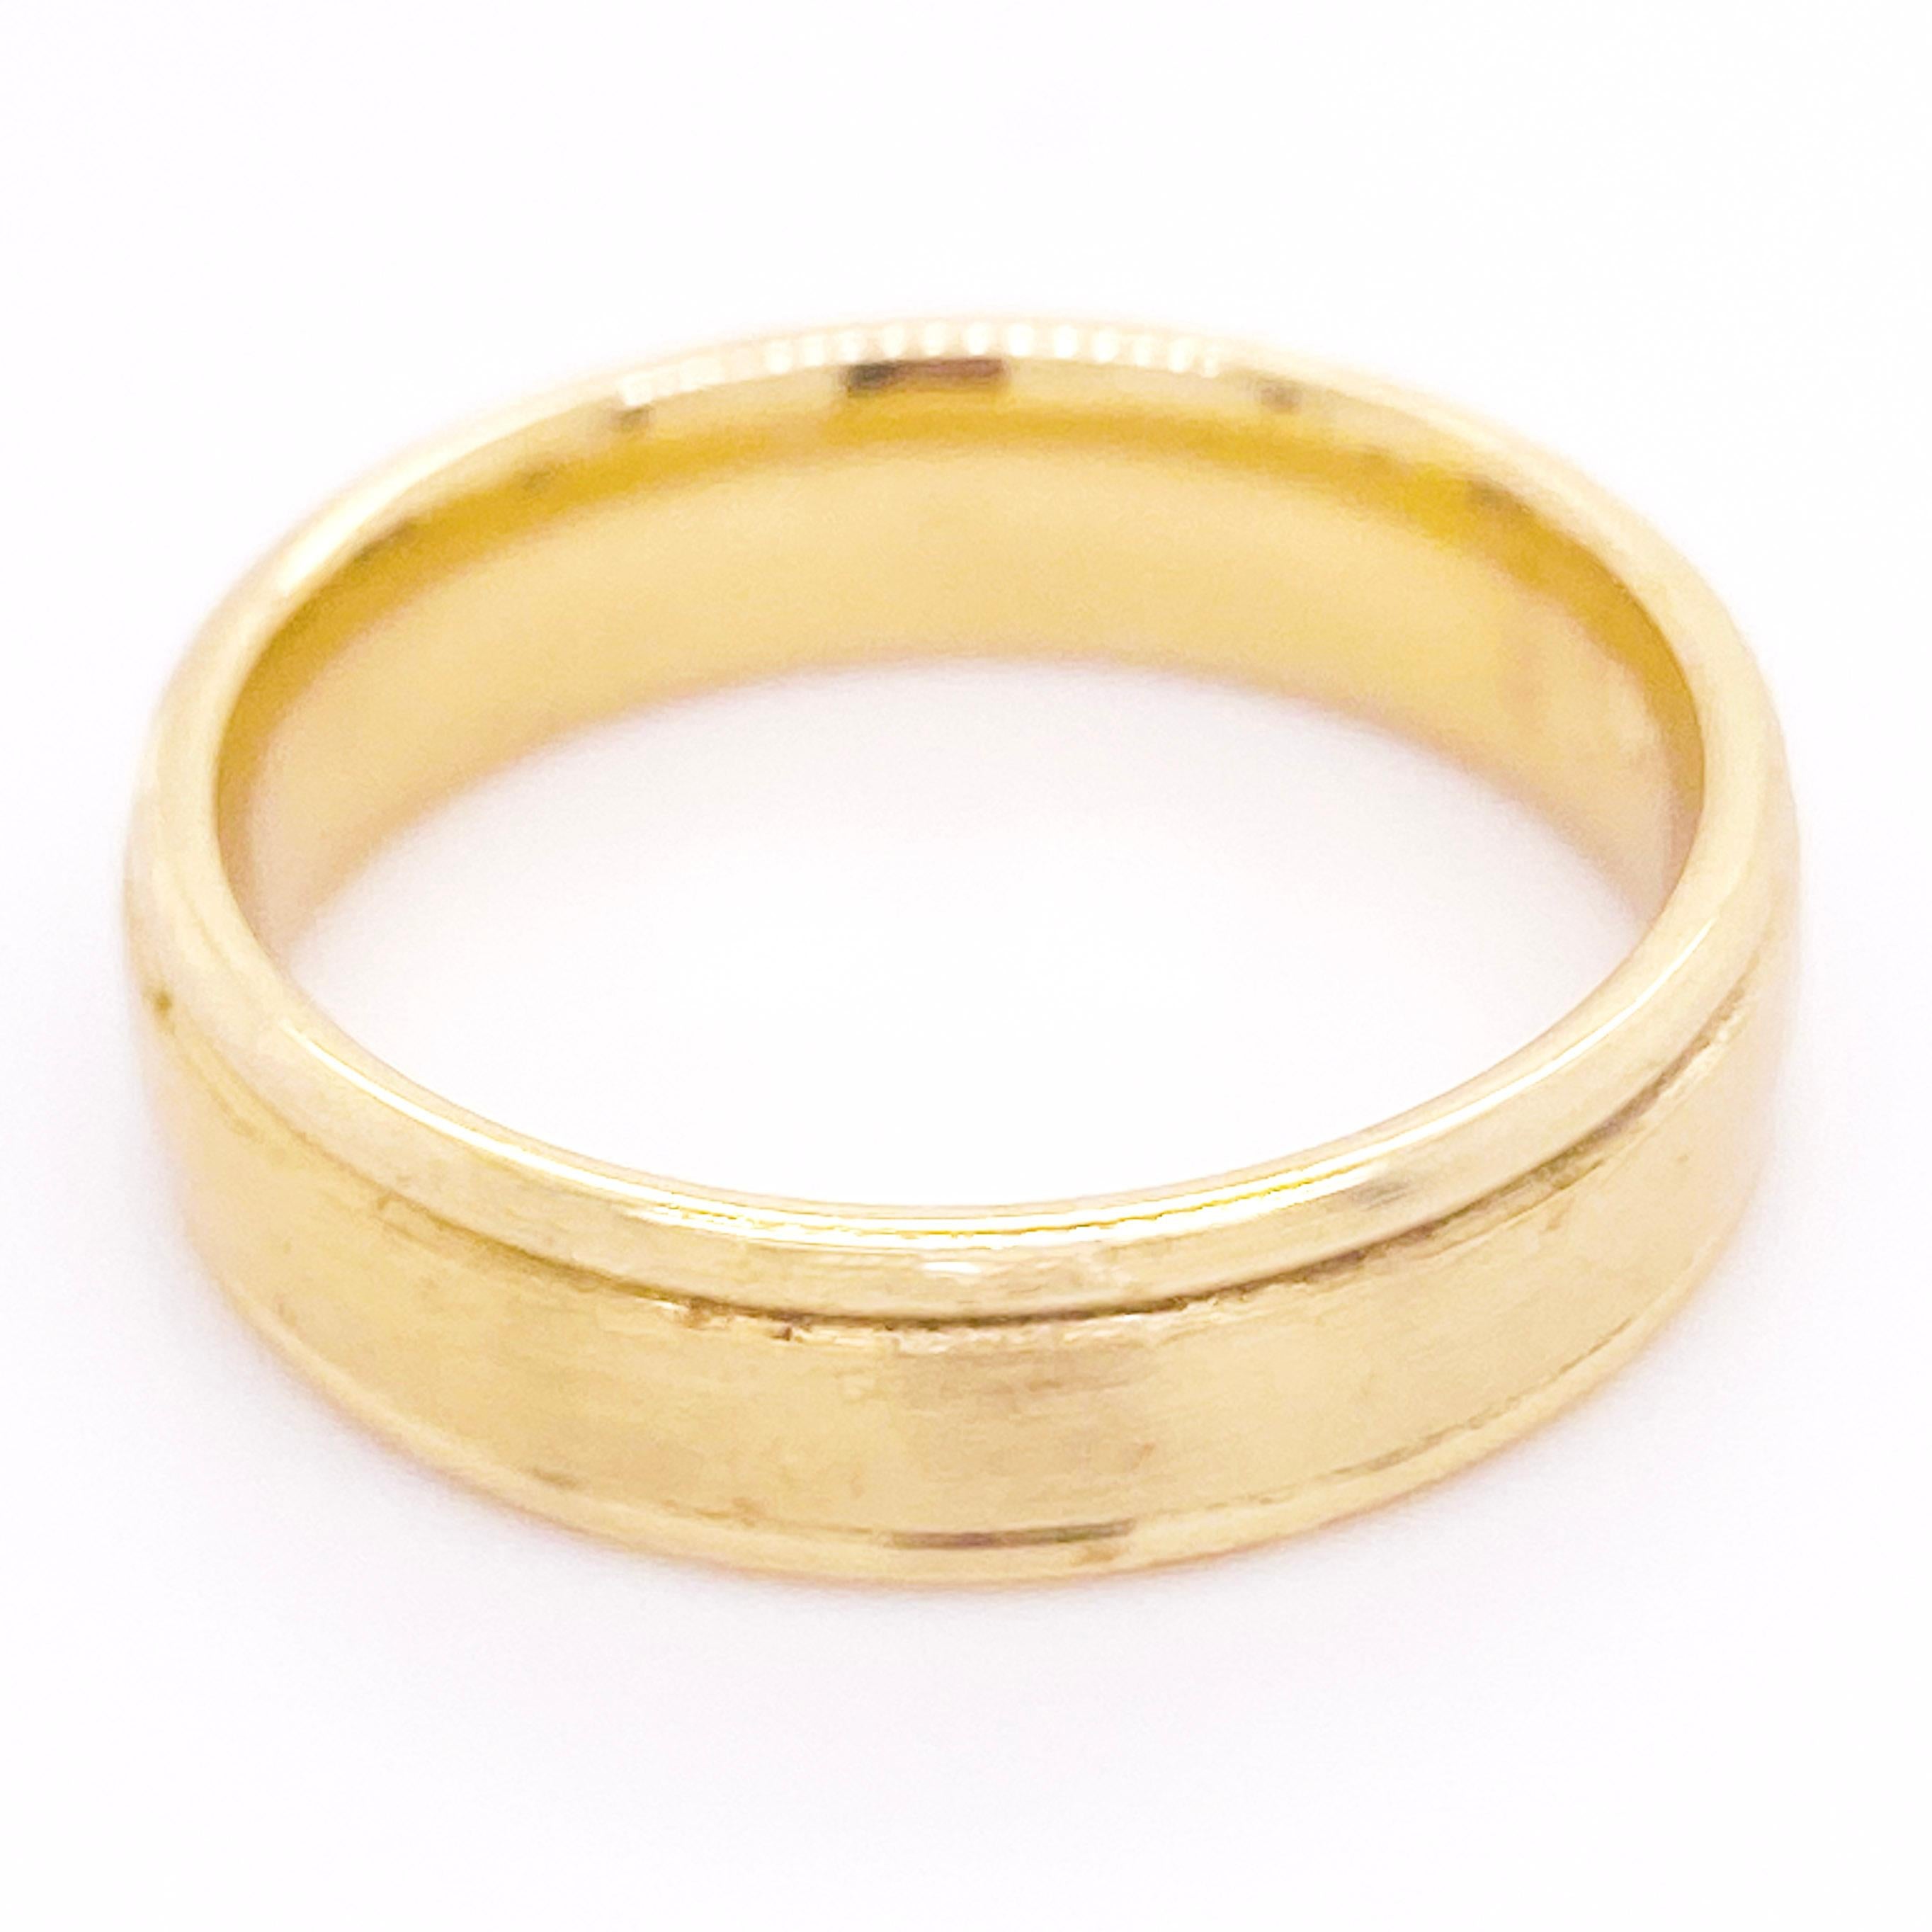 For Sale:  Men's Gold Band w Satin Center and One Millimeter High-Polished on the Edges 2